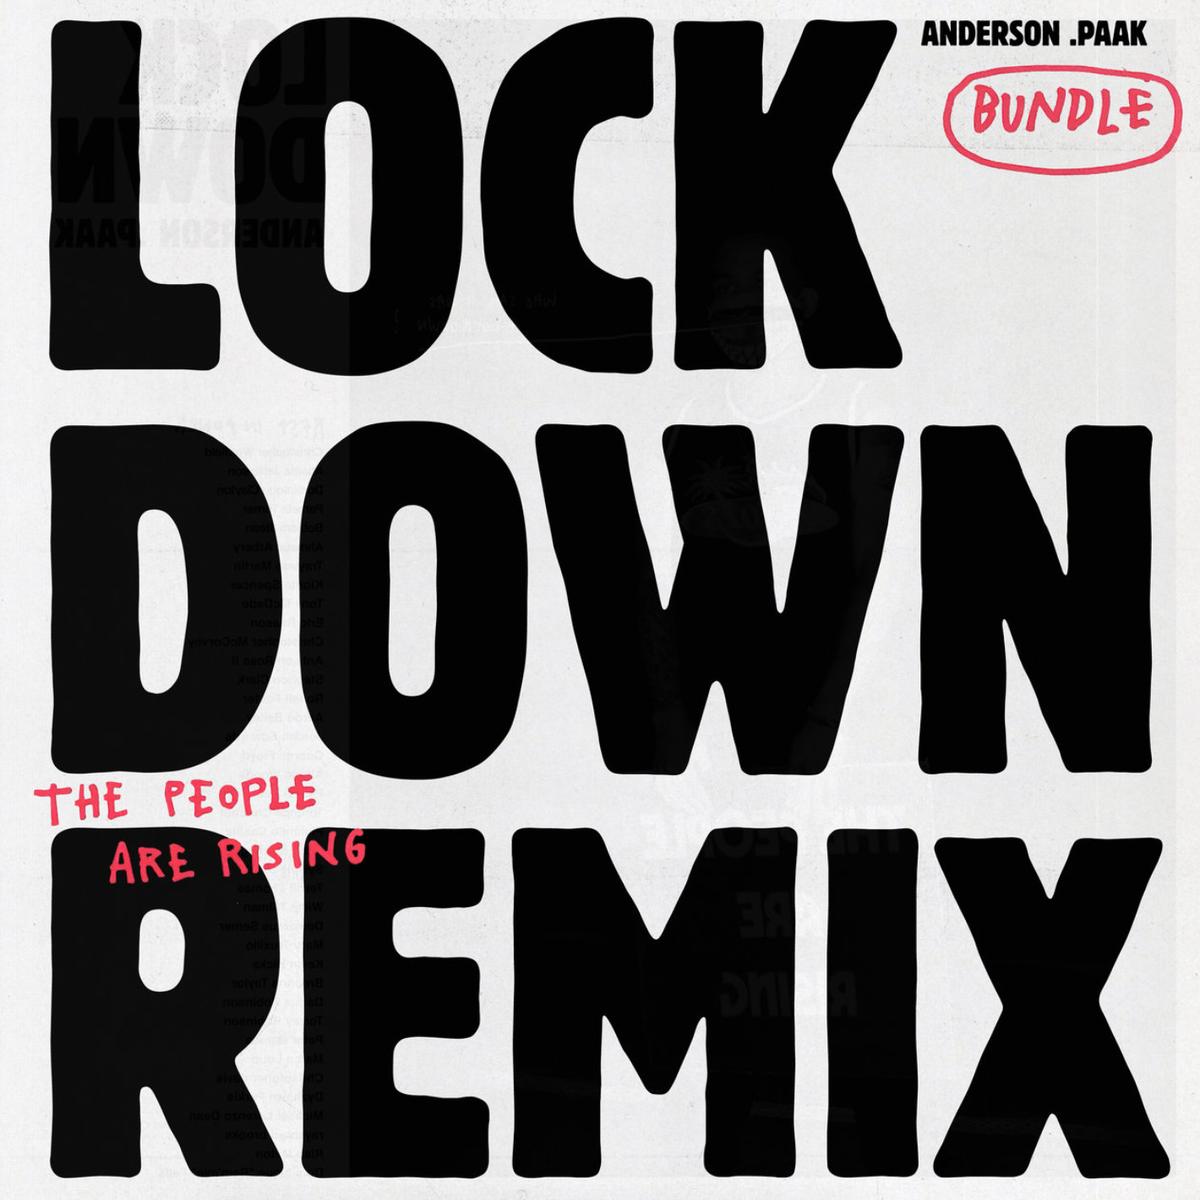 Anderson .Paak Calls On J.I.D, Jay Rock & Noname For “Lockdown (Remix)”